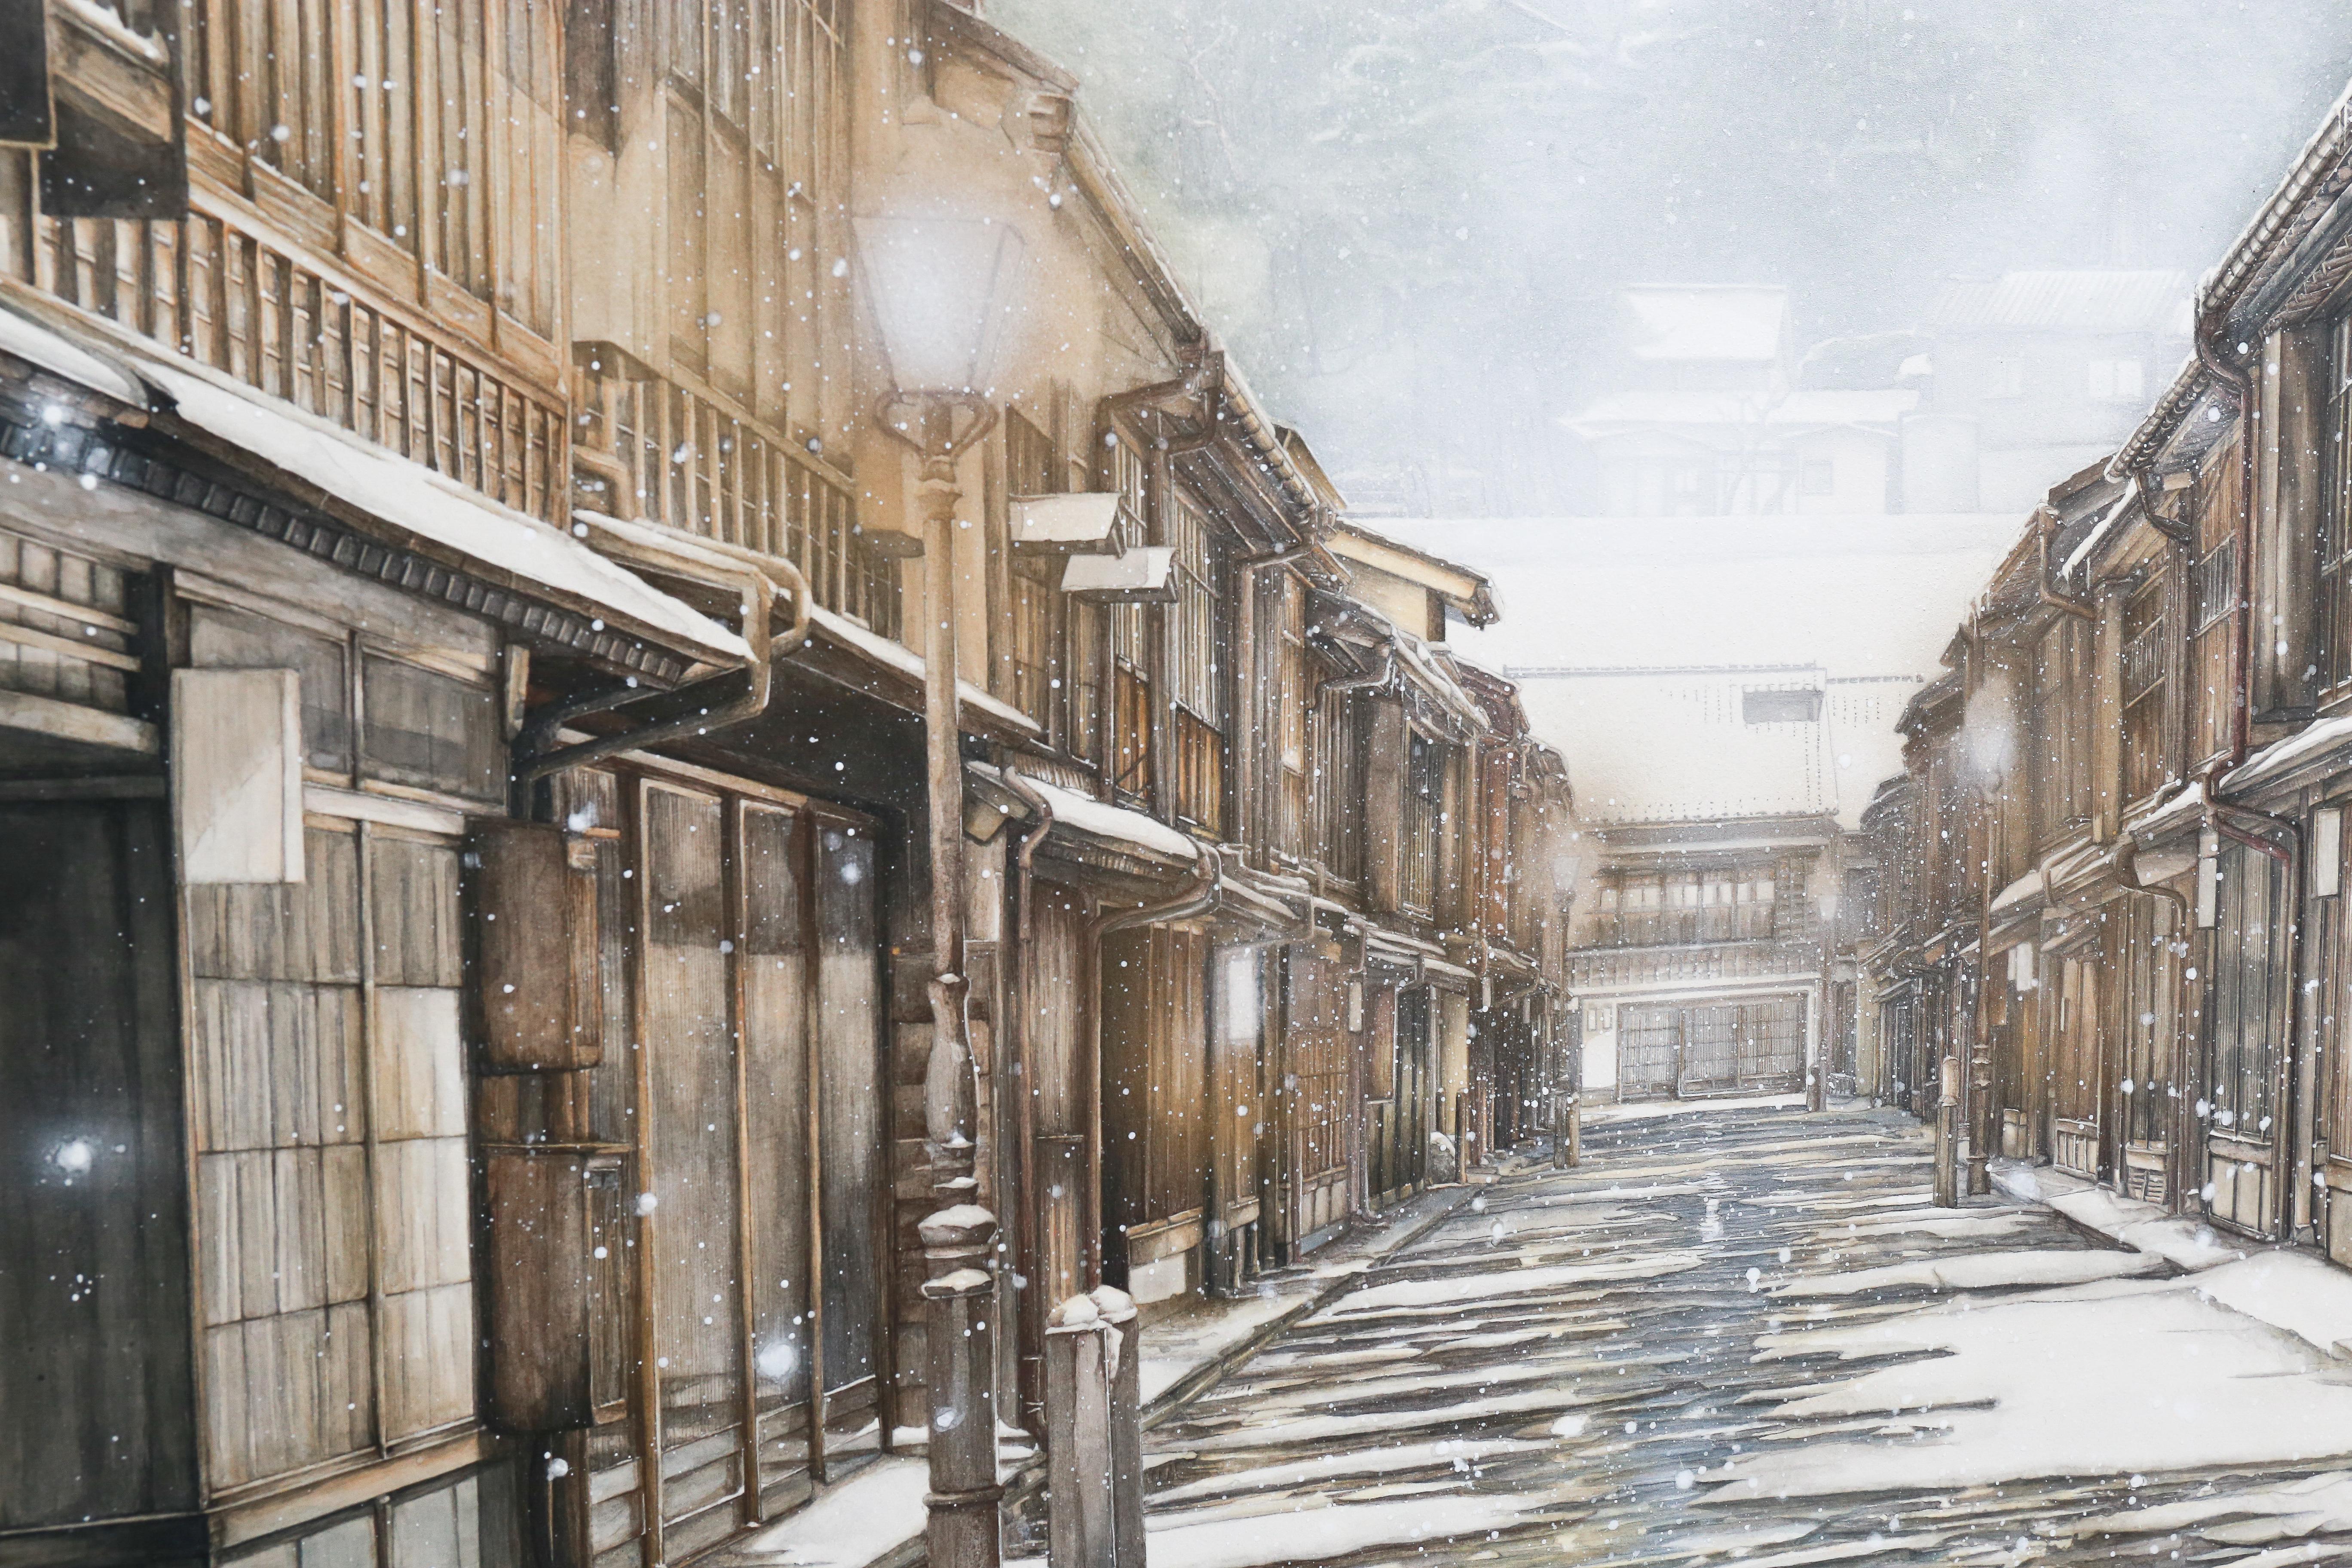 Kanazawa - Japanese Cityscape Painting in 24k Gold and Minerals, Realism, Winter For Sale 3